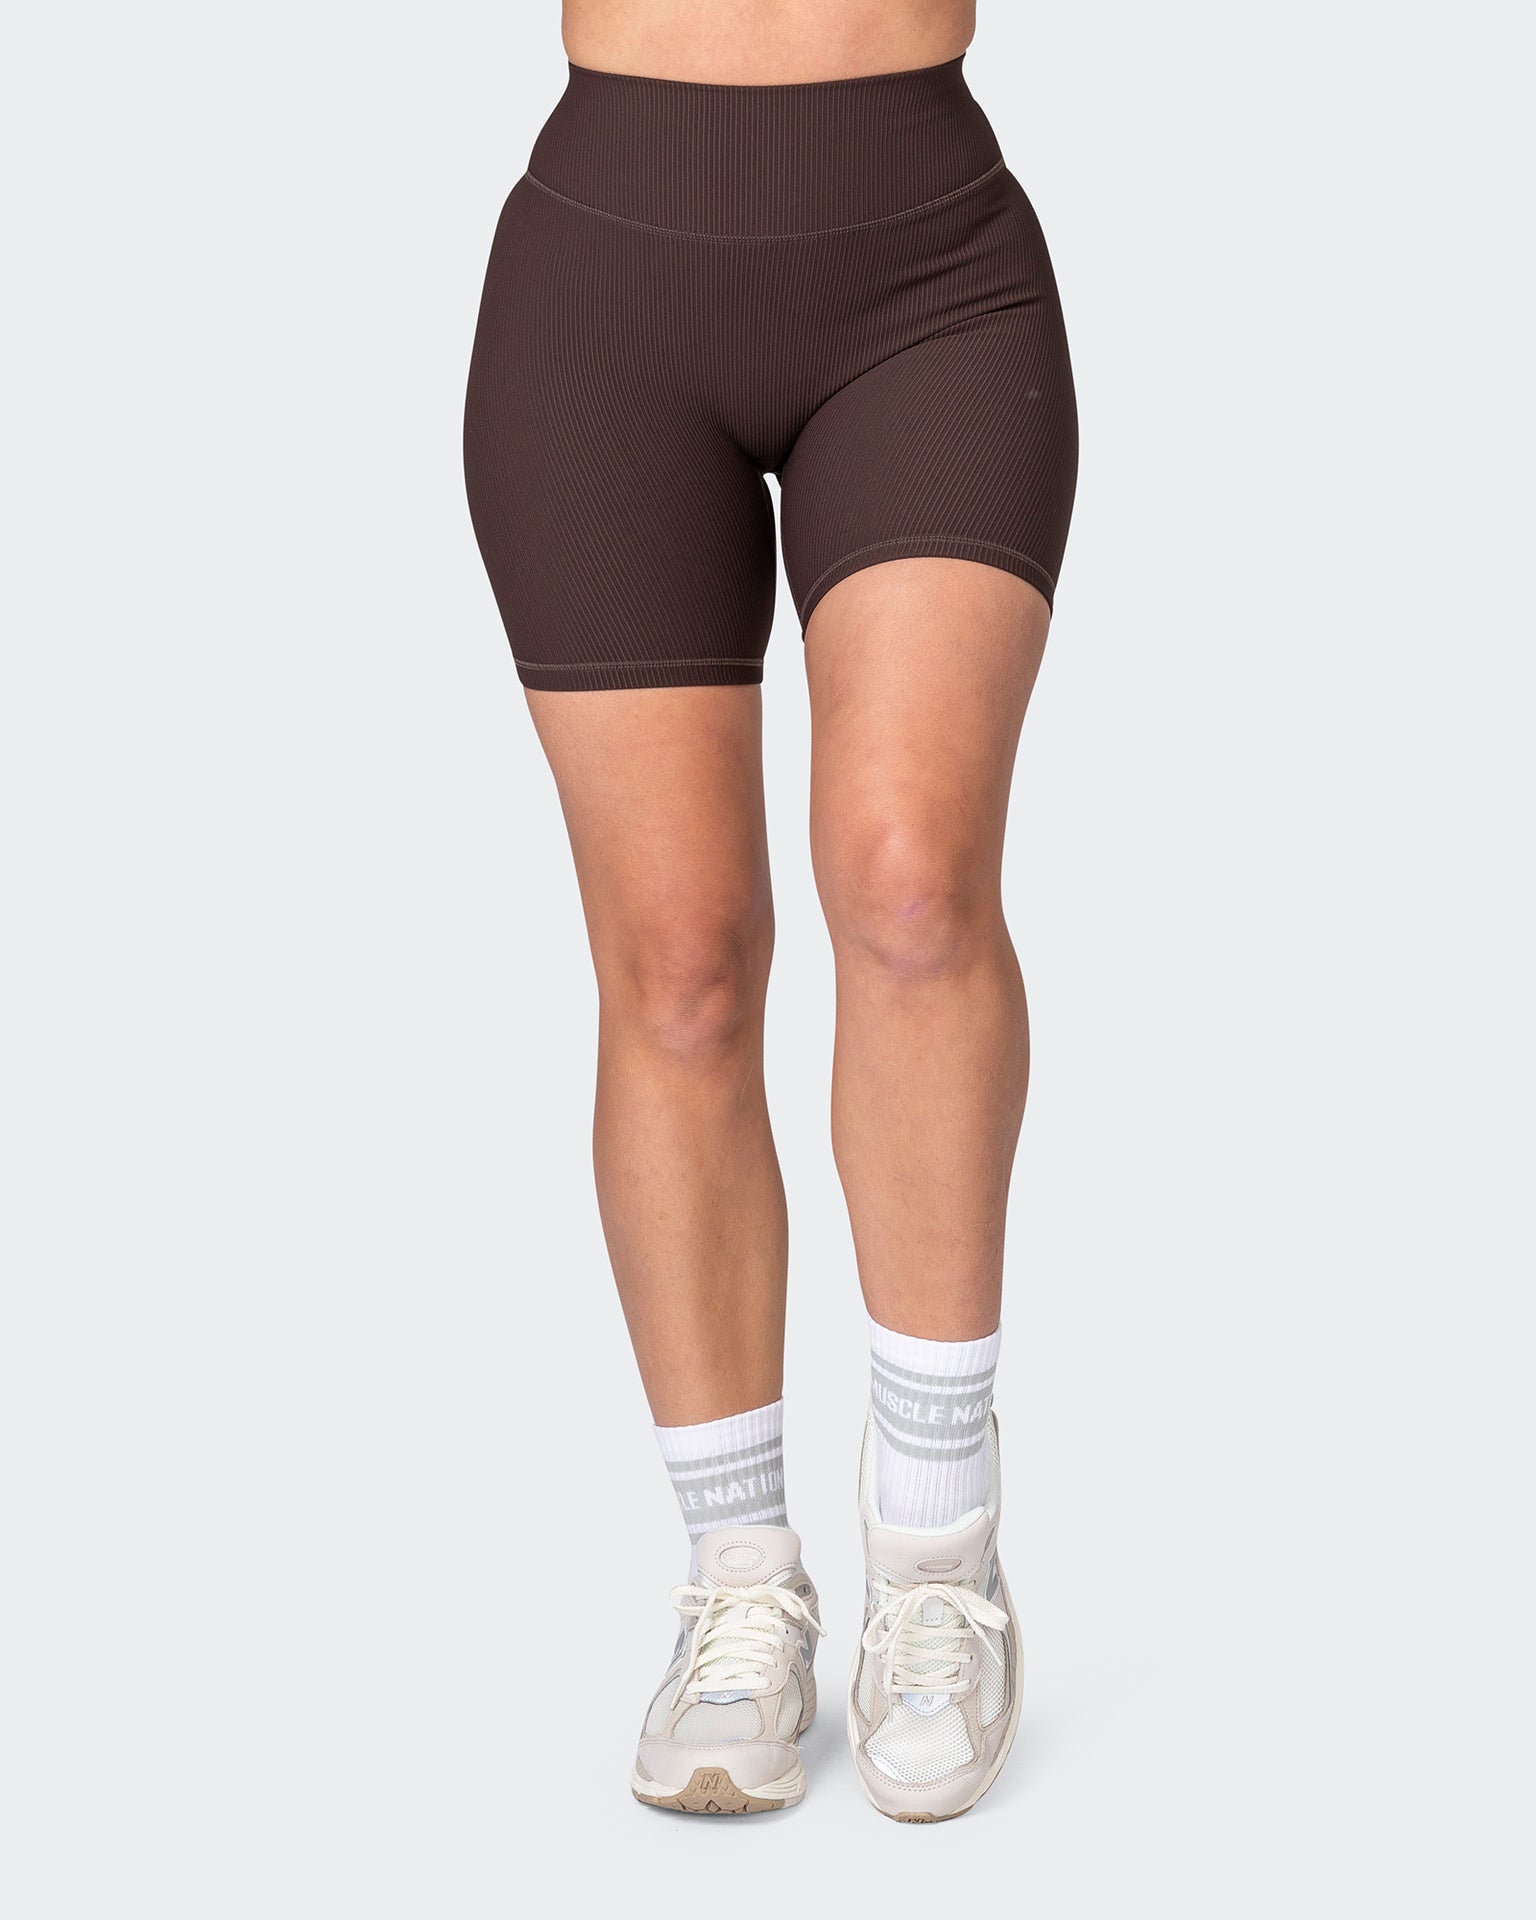 💕 Ribbed Bike Shorts at Costco! These high waist biker shorts are moi, biker shorts